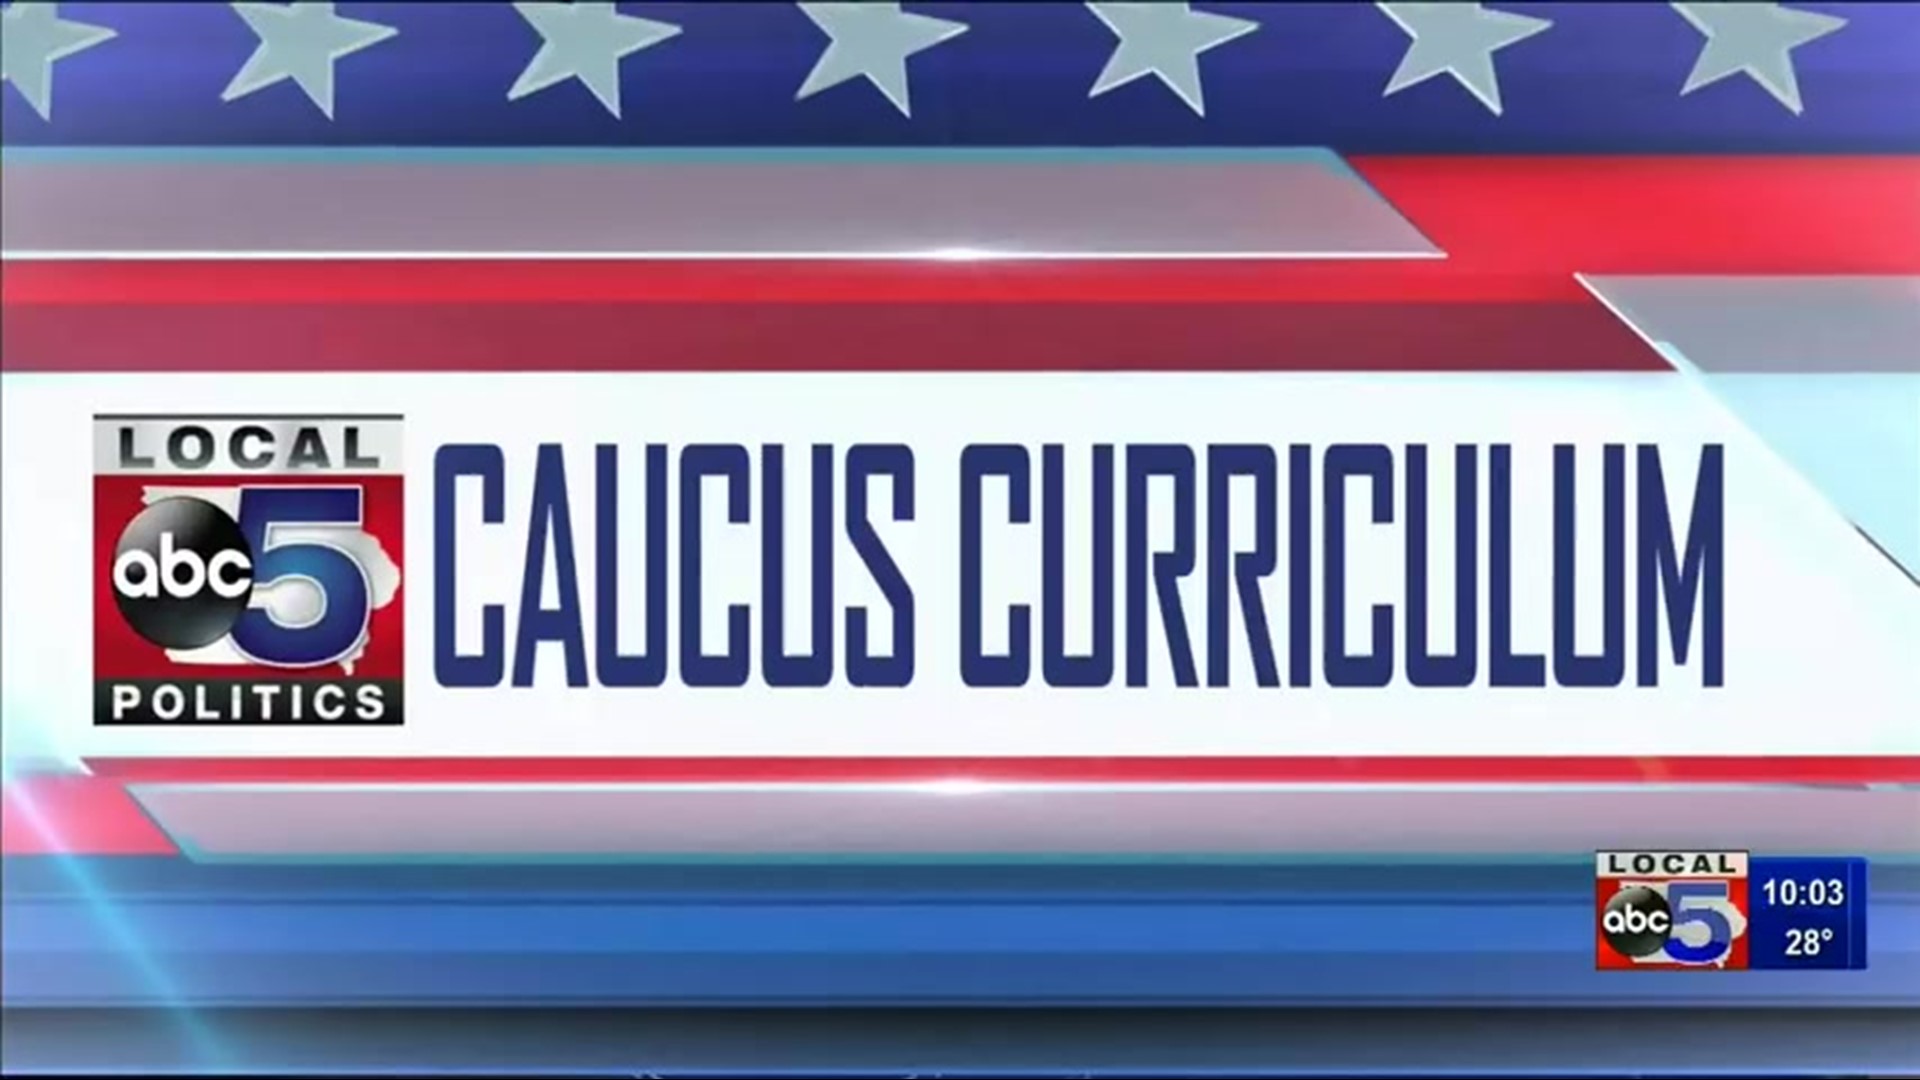 Caucus Curriculum: What's the difference between Democratic and Republican caucuses?